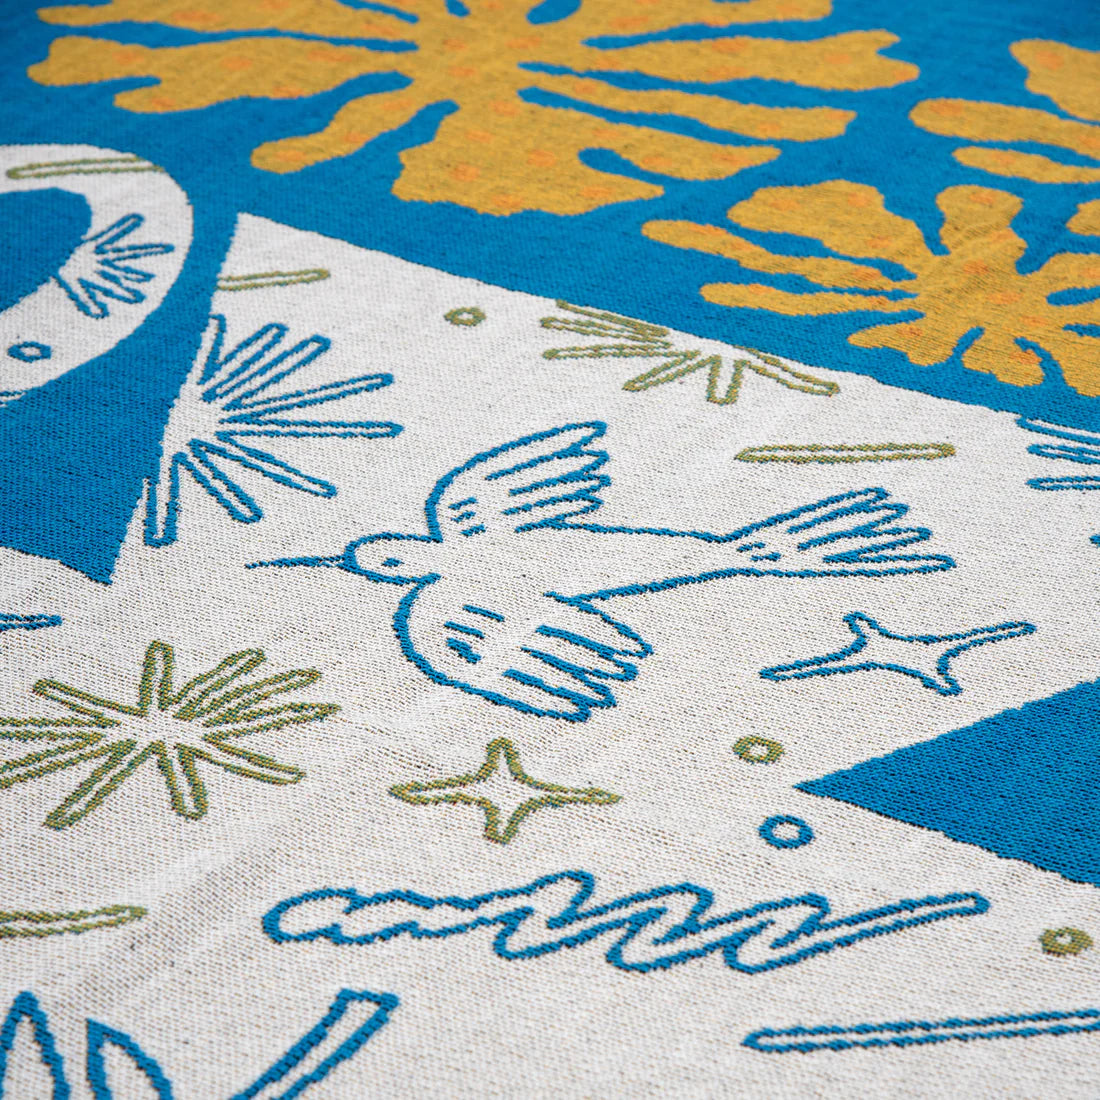 Detail of a blue, white and yellow tapestry blanket depicting a white vase and yellow flowers